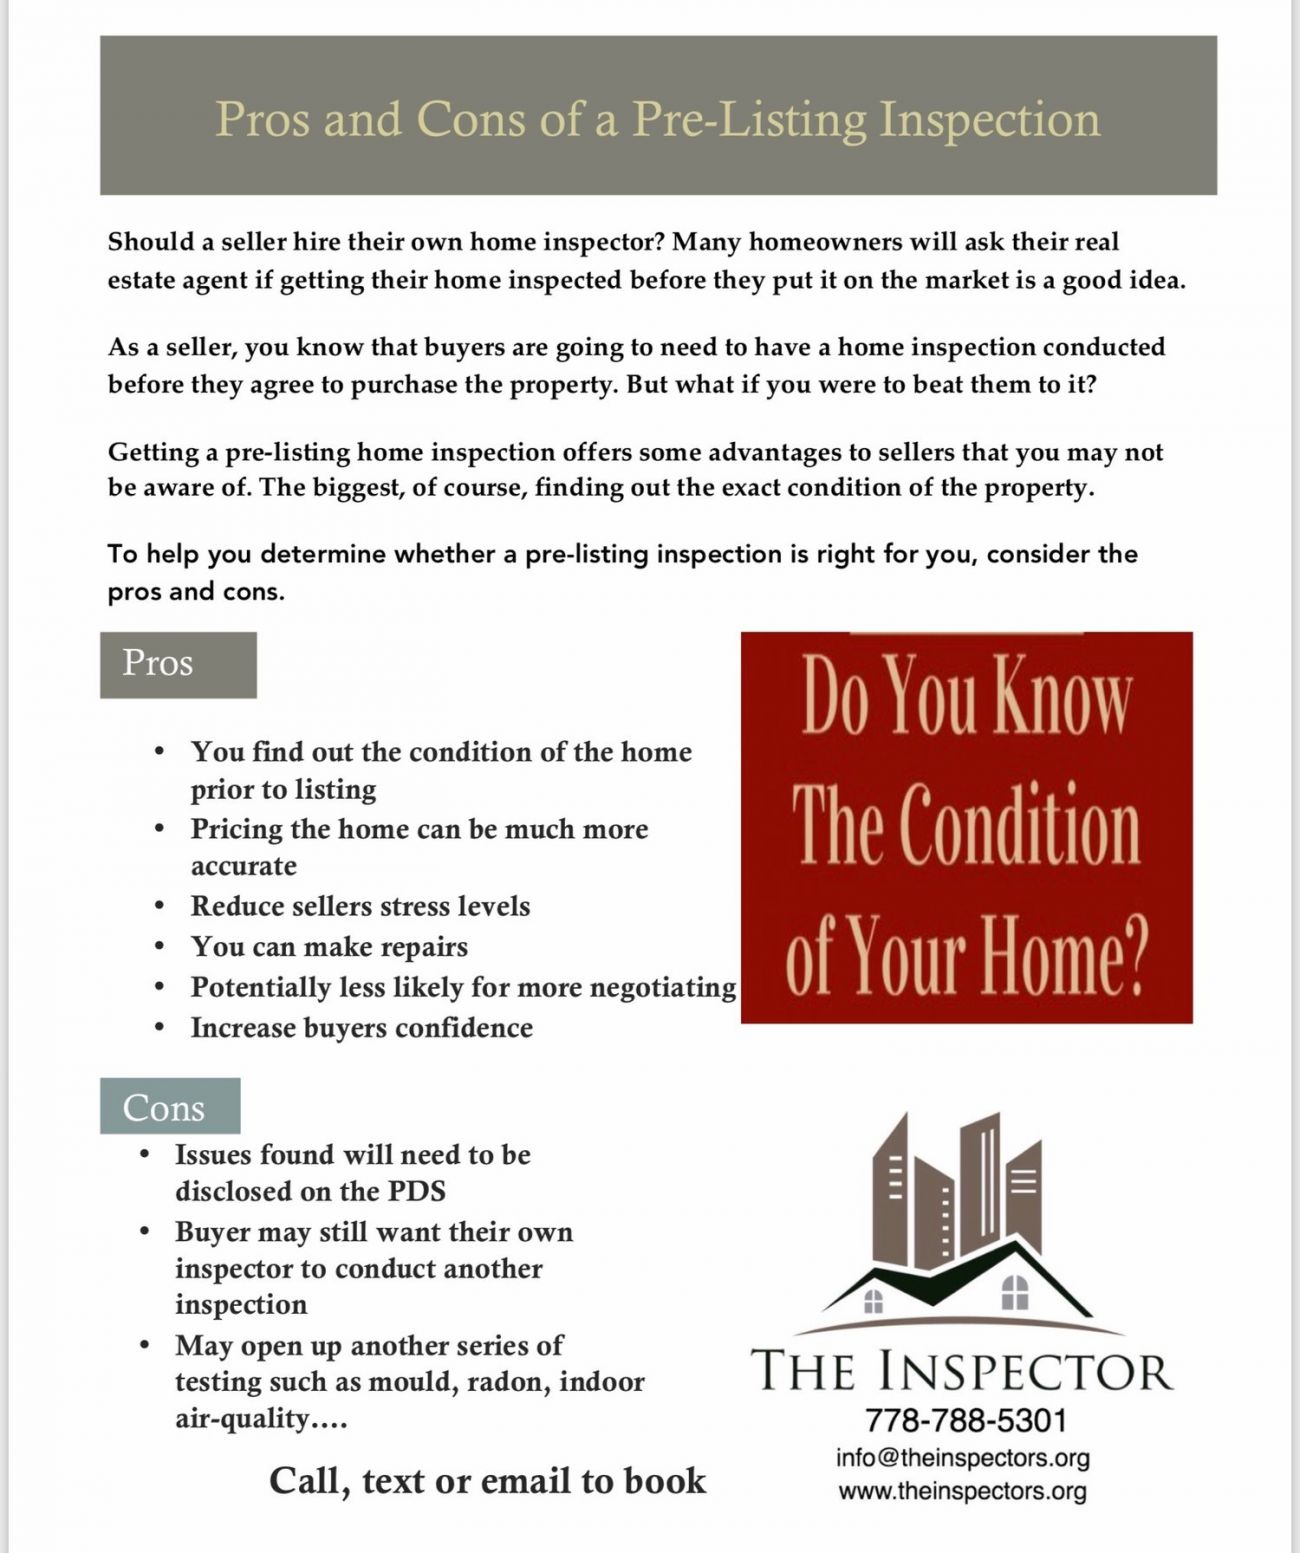 What are the Pros and Cons of a Pre-Listing Inspection